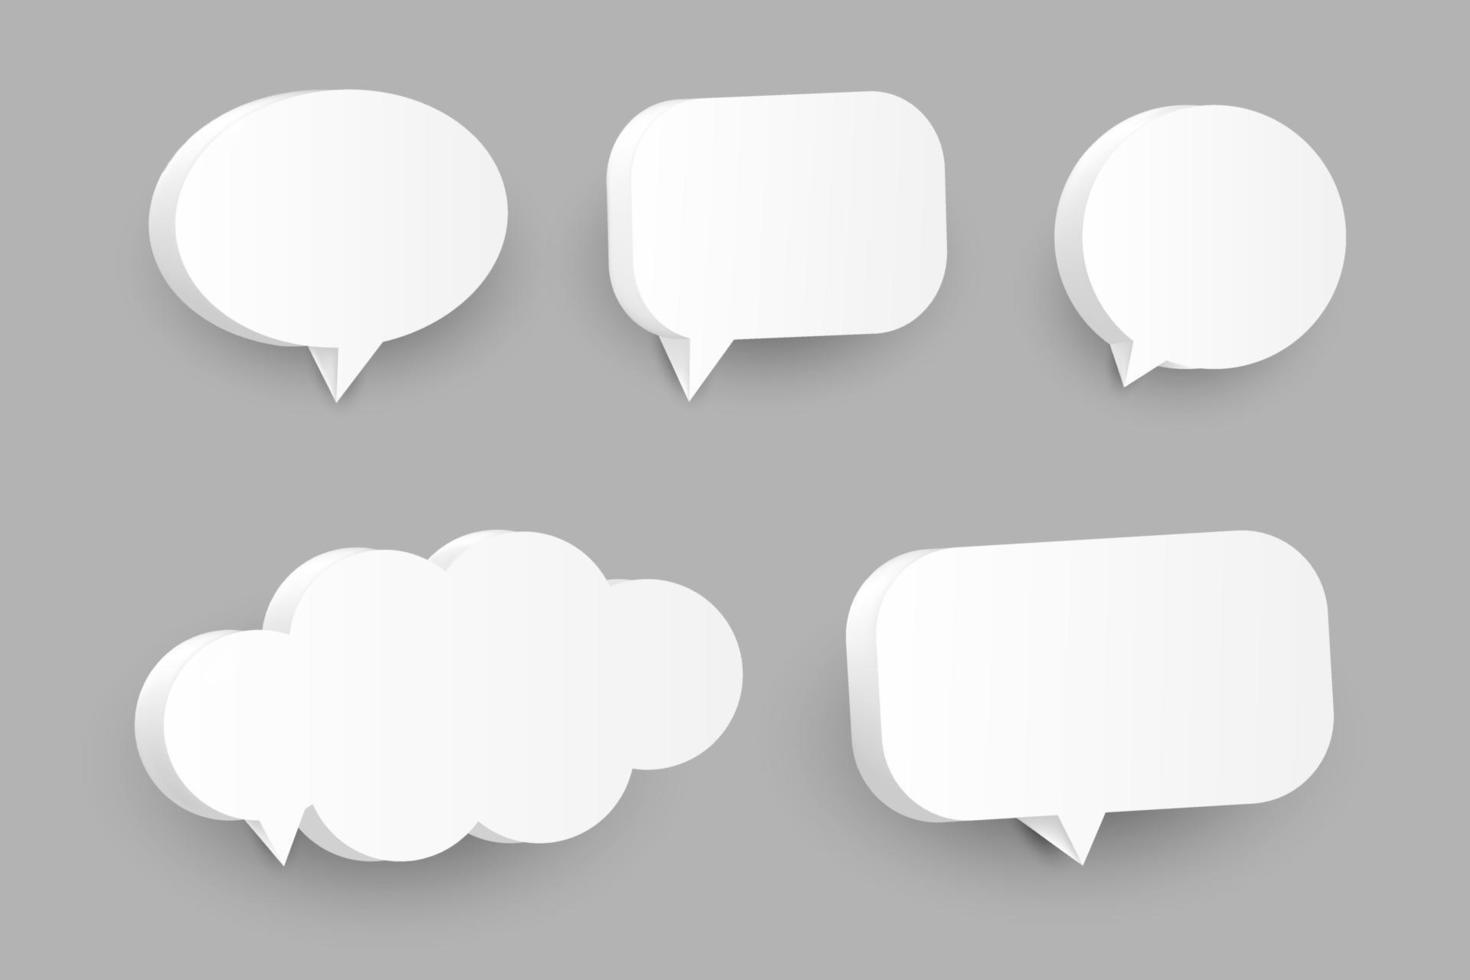 blank 3d speech bubbles, icon set poster and banner concept on gray background vector